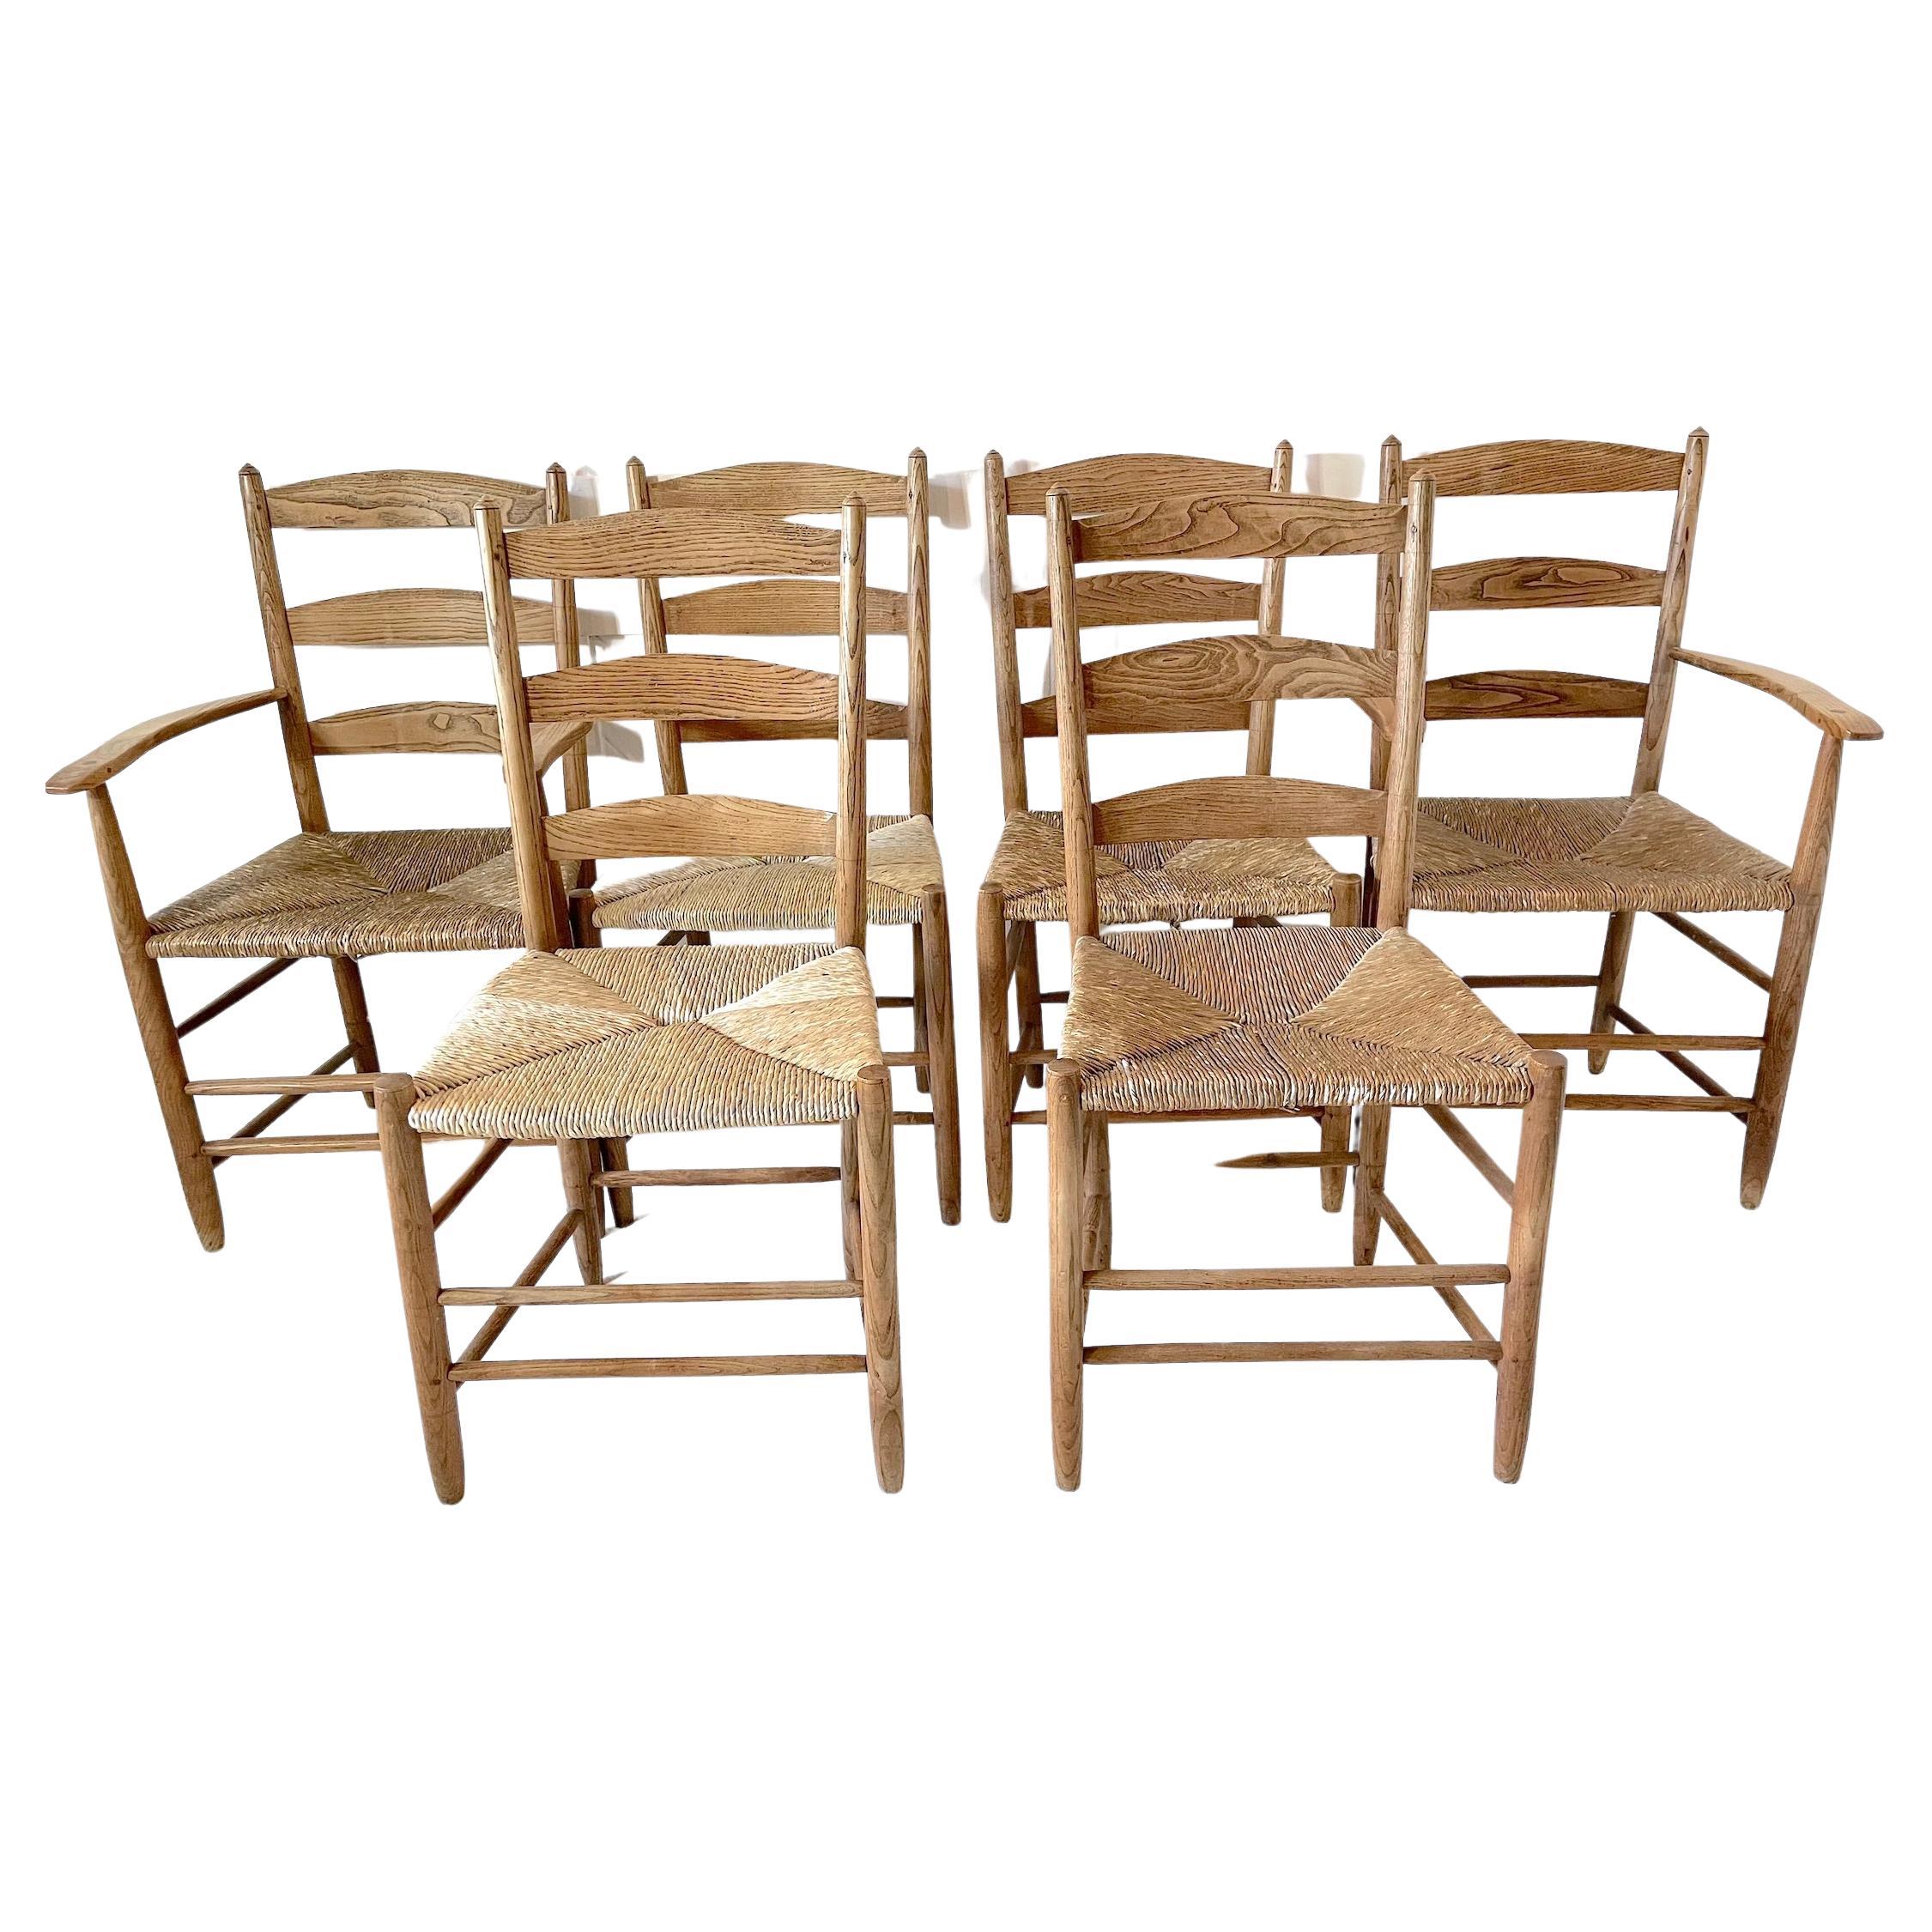 Cotswold School Set of 6 Chairs by Ernest Gimson